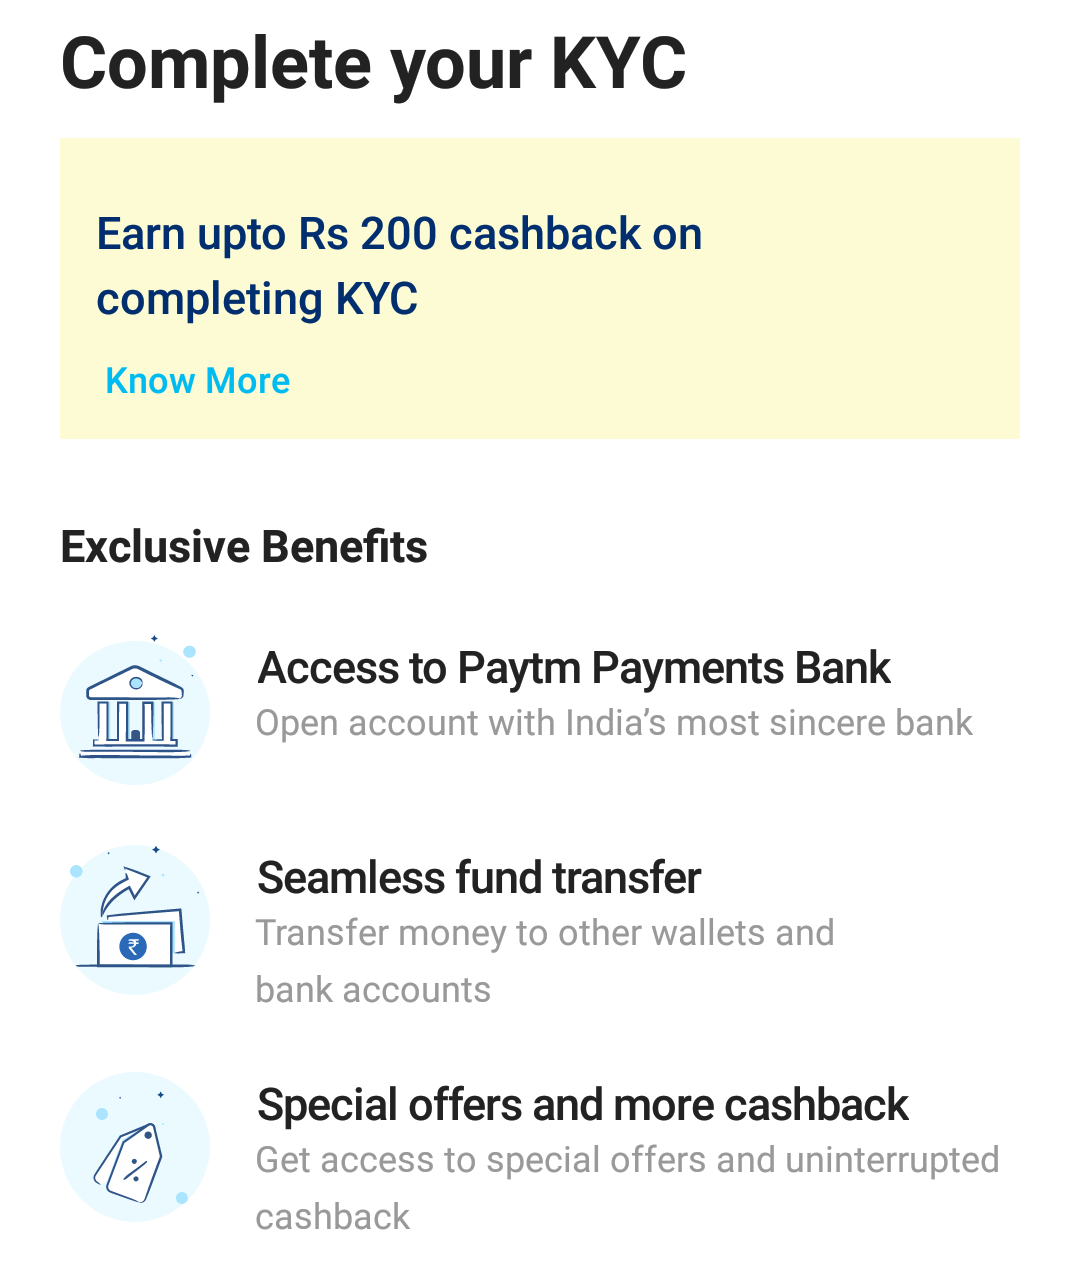 Advantages of Completing Your KYC